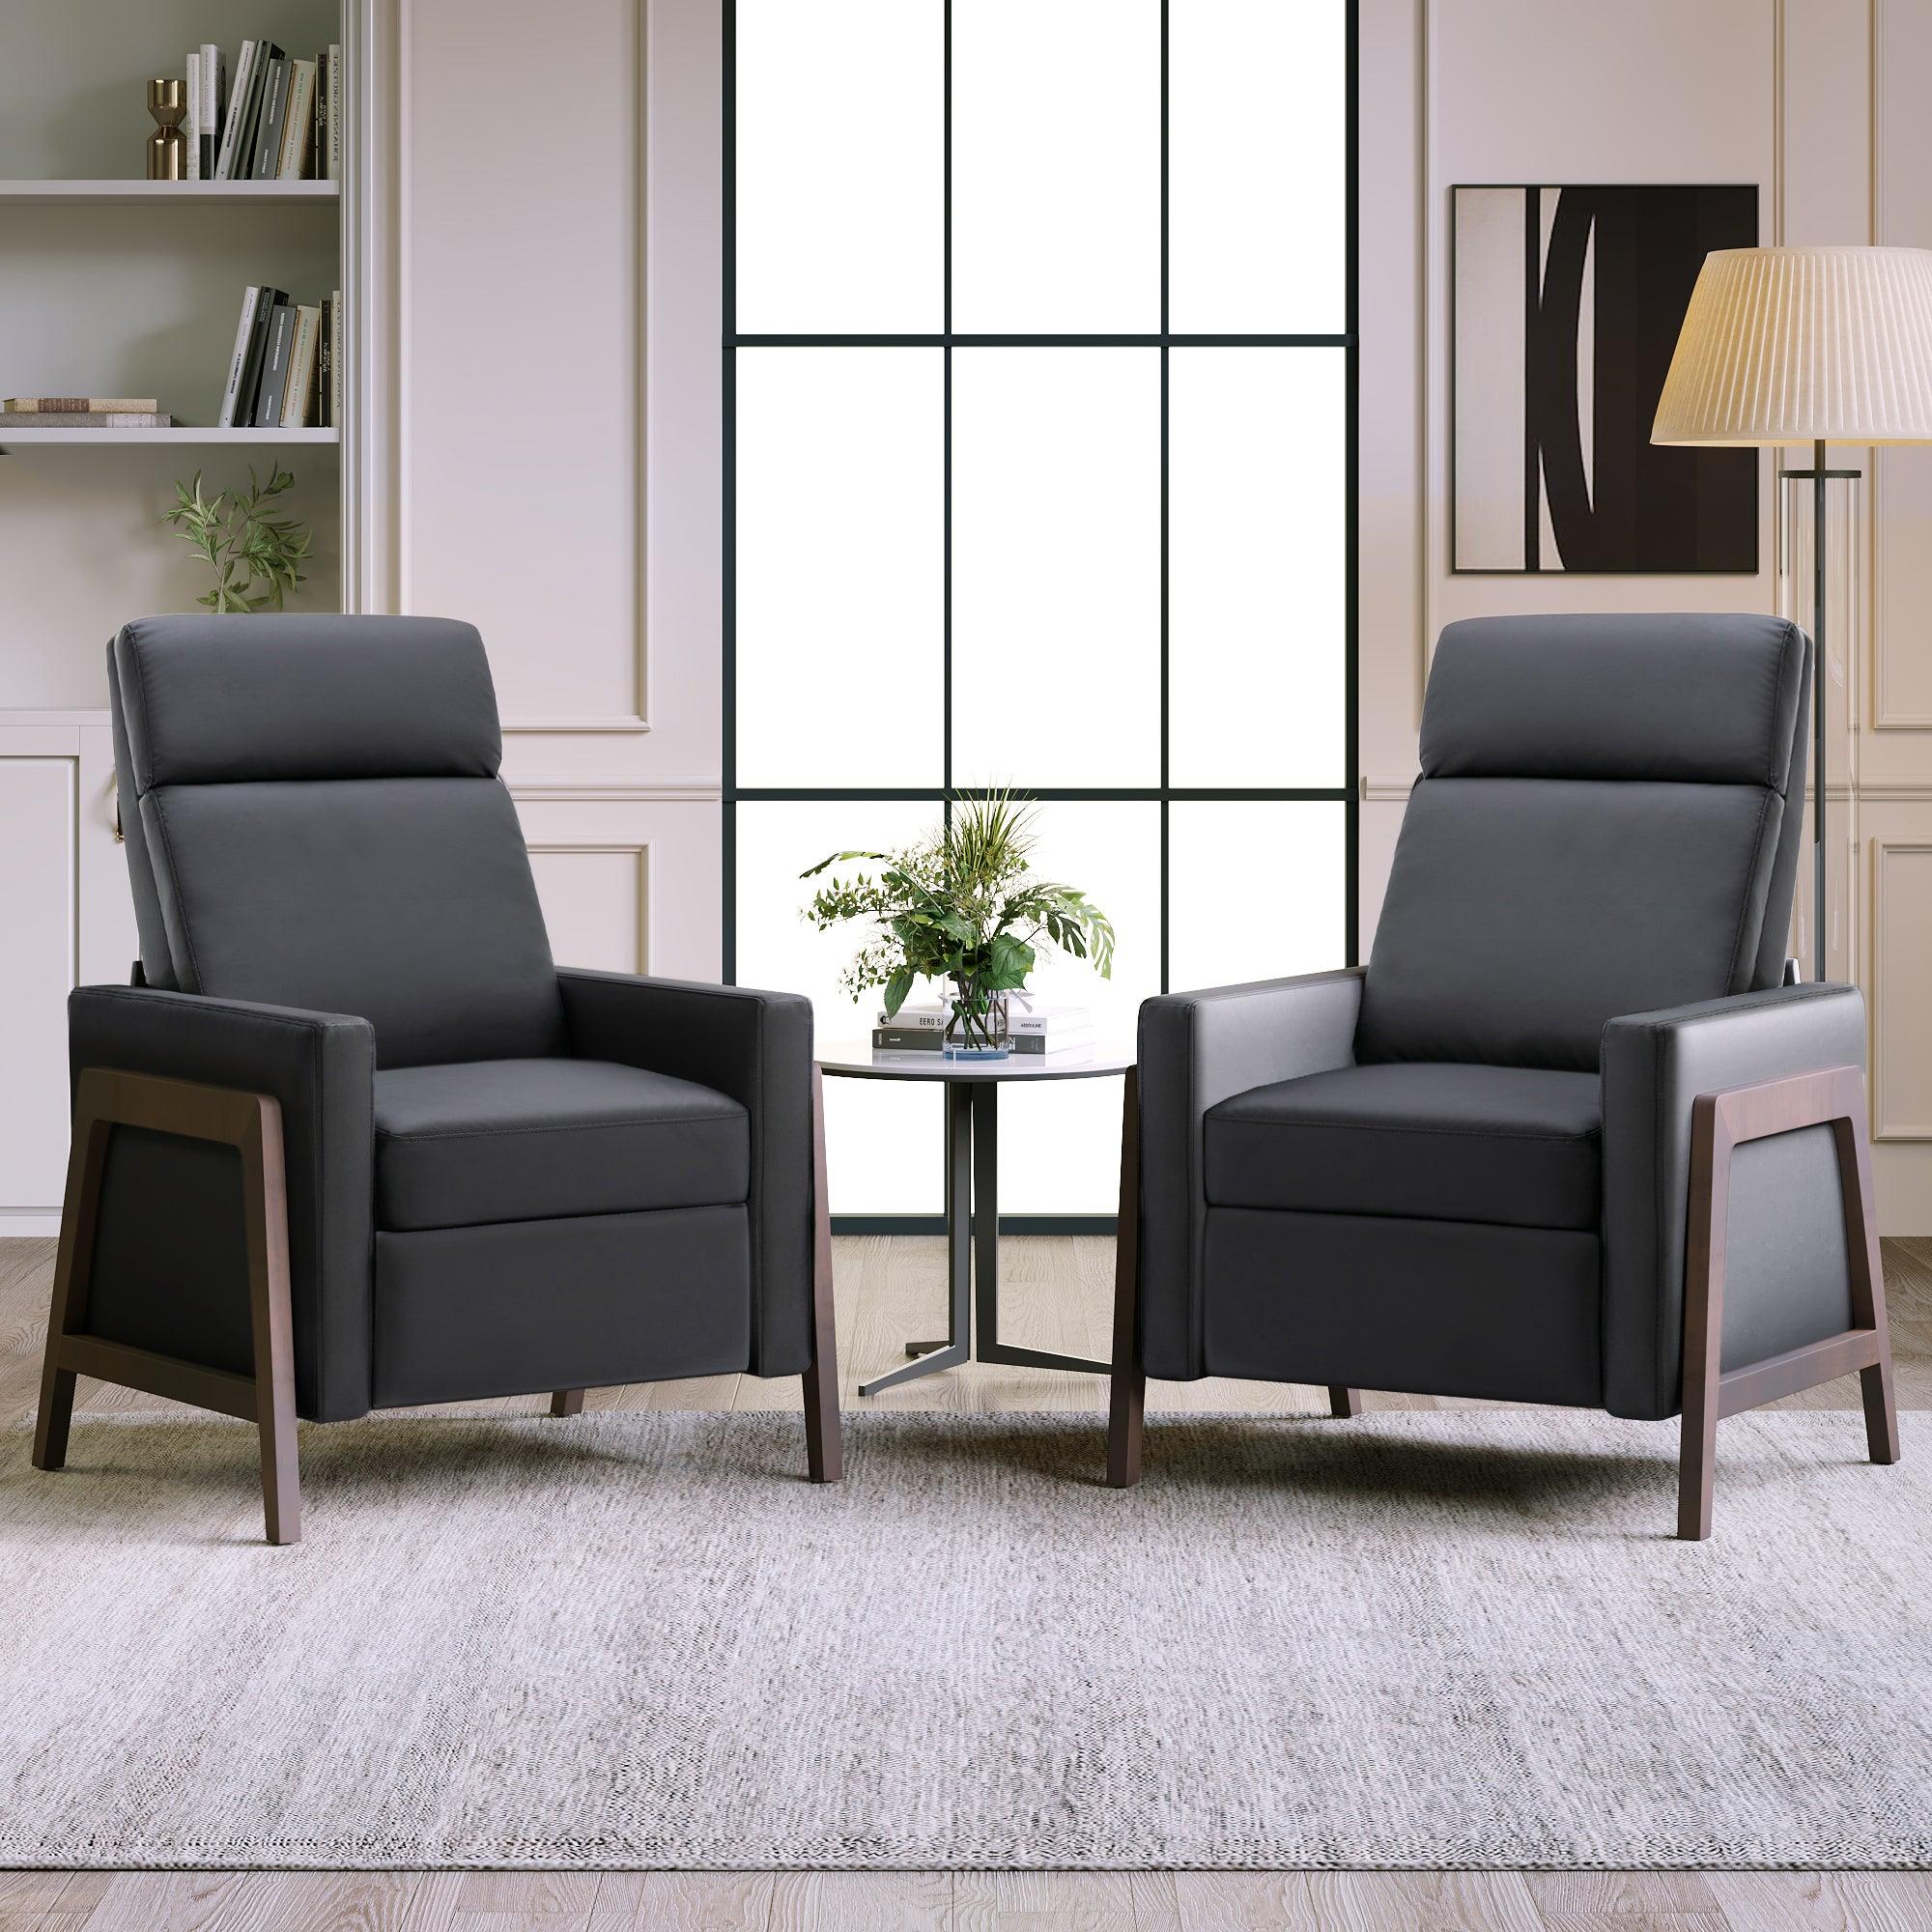 🆓🚛 Set Of 2 Wood-Framed Pu Leather Recliner Chair Adjustable Home Theater Seating With Thick Seat Cushion & Backrest Modern Living Room Recliners, Black